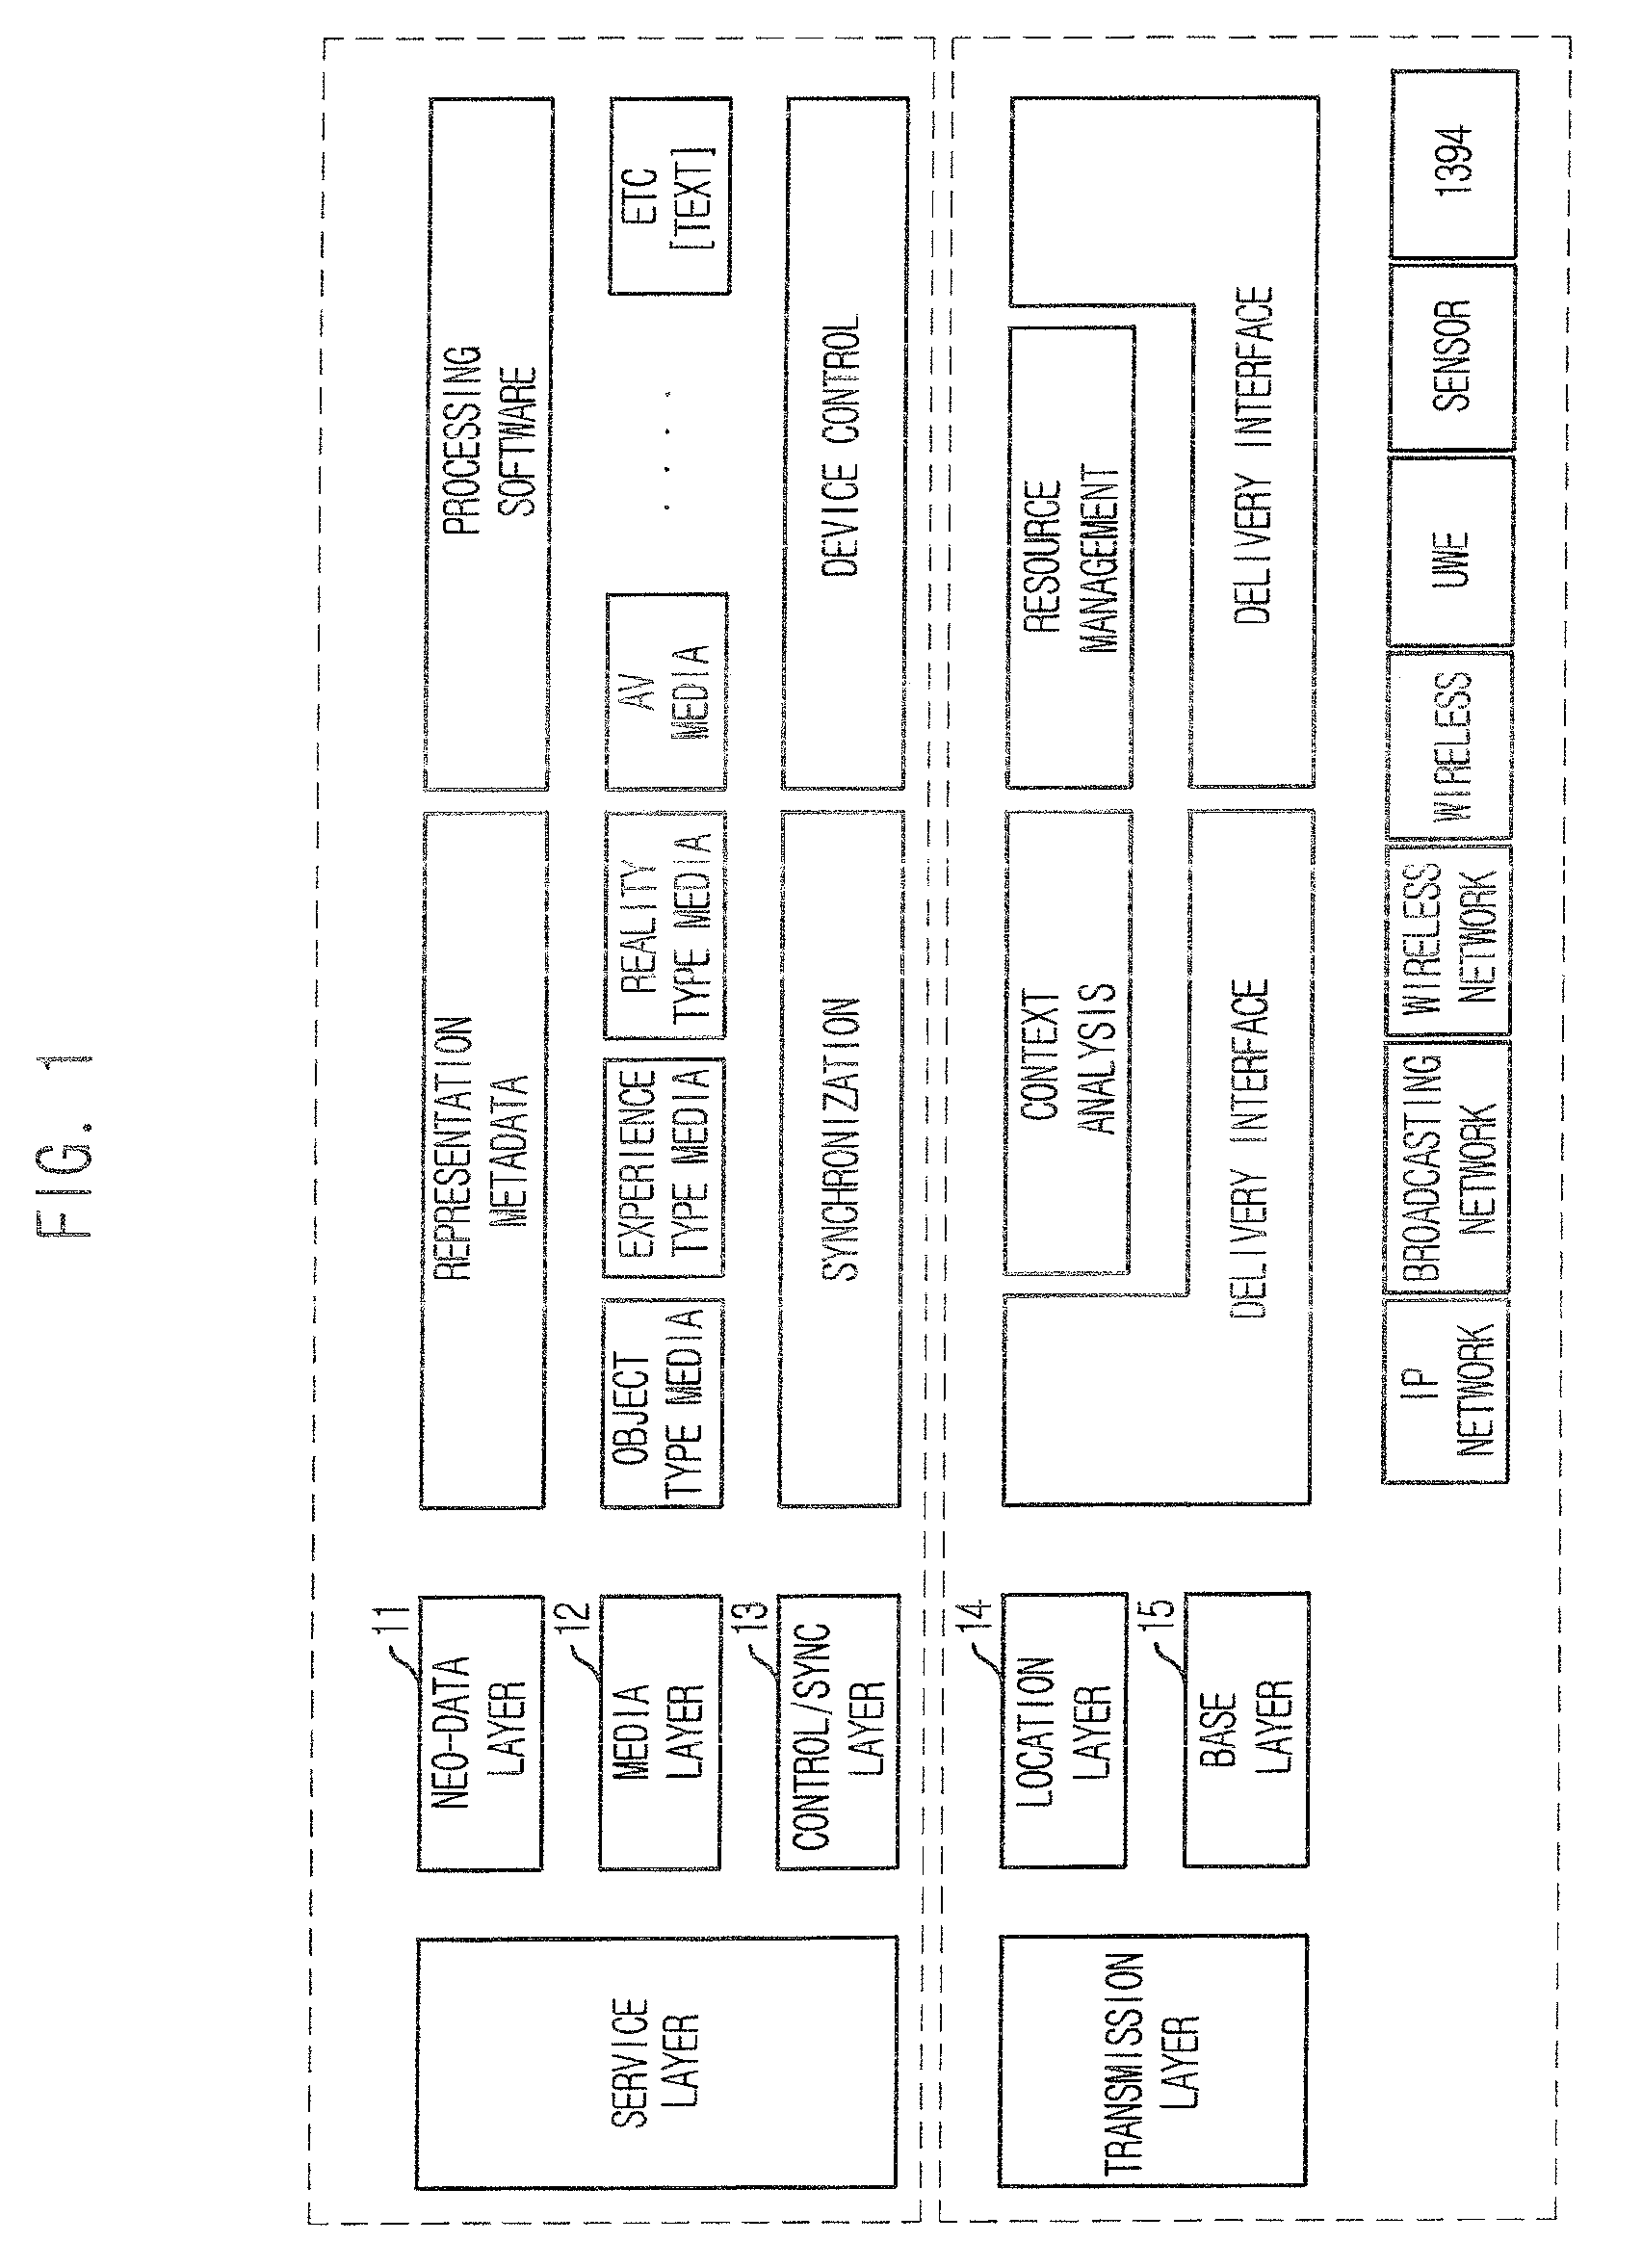 Ubiquitous home media service apparatus and method based on smmd, and home media service system and method using the same